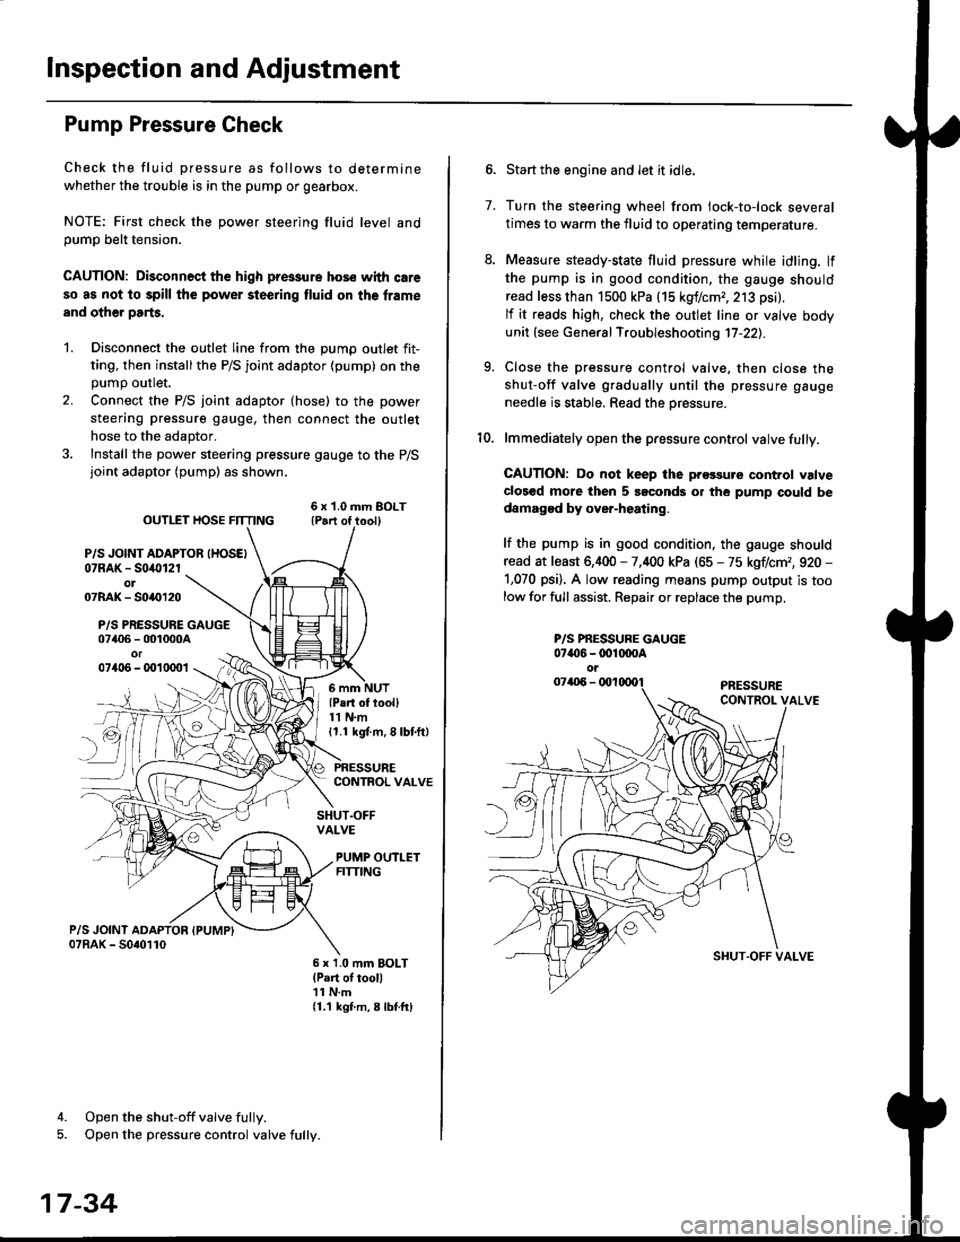 HONDA CIVIC 1997 6.G Workshop Manual lnspection and Adjustment
Pump Pressure Check
Check the fluid pressure as follows to determine
whether the trouble is in the pump or gearbox.
NOTE: First check the power steering fluid level andpump b